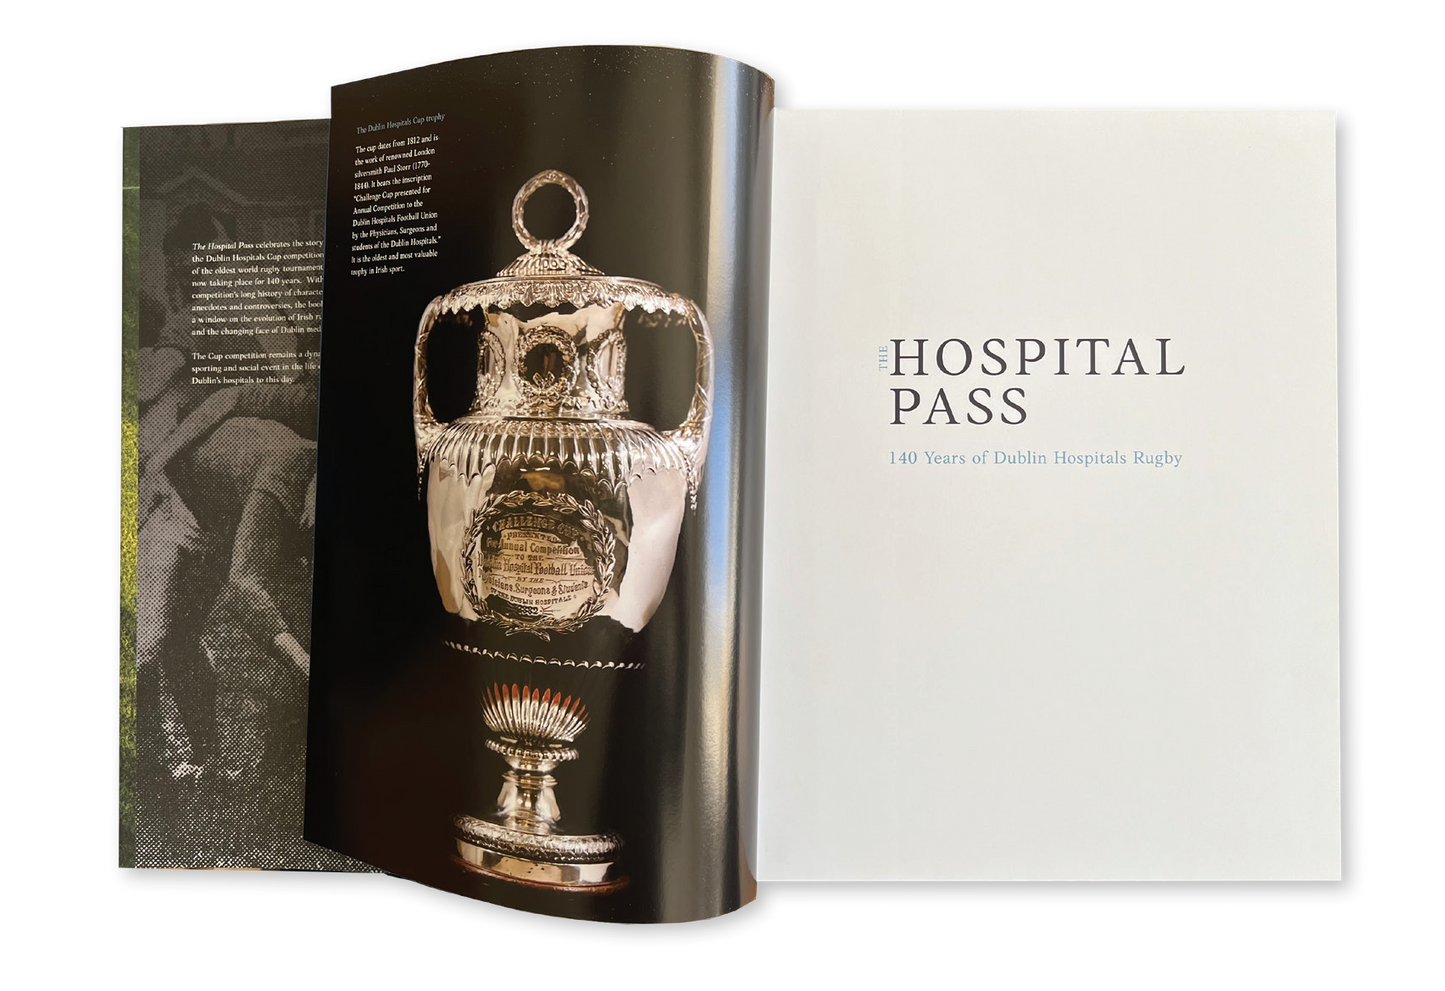 The Hospital Pass - 140 Years of Dublin Hospitals Rugby